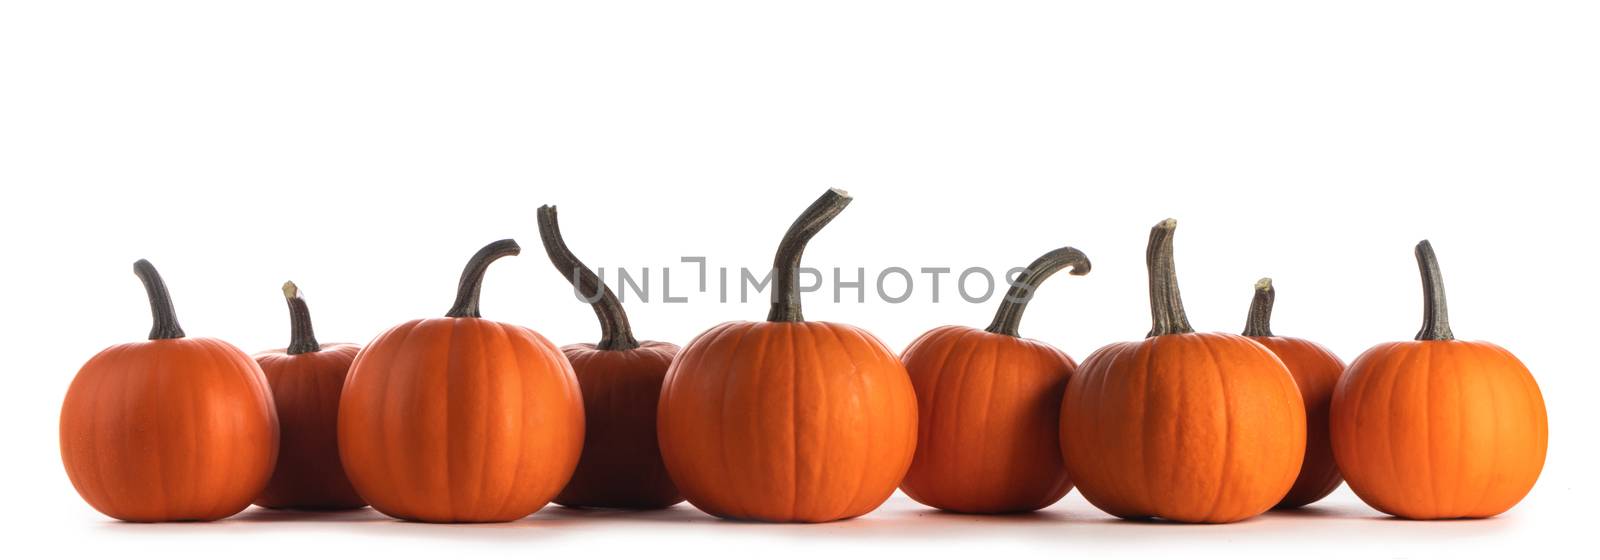 Pumpkins in a row on white background by Yellowj